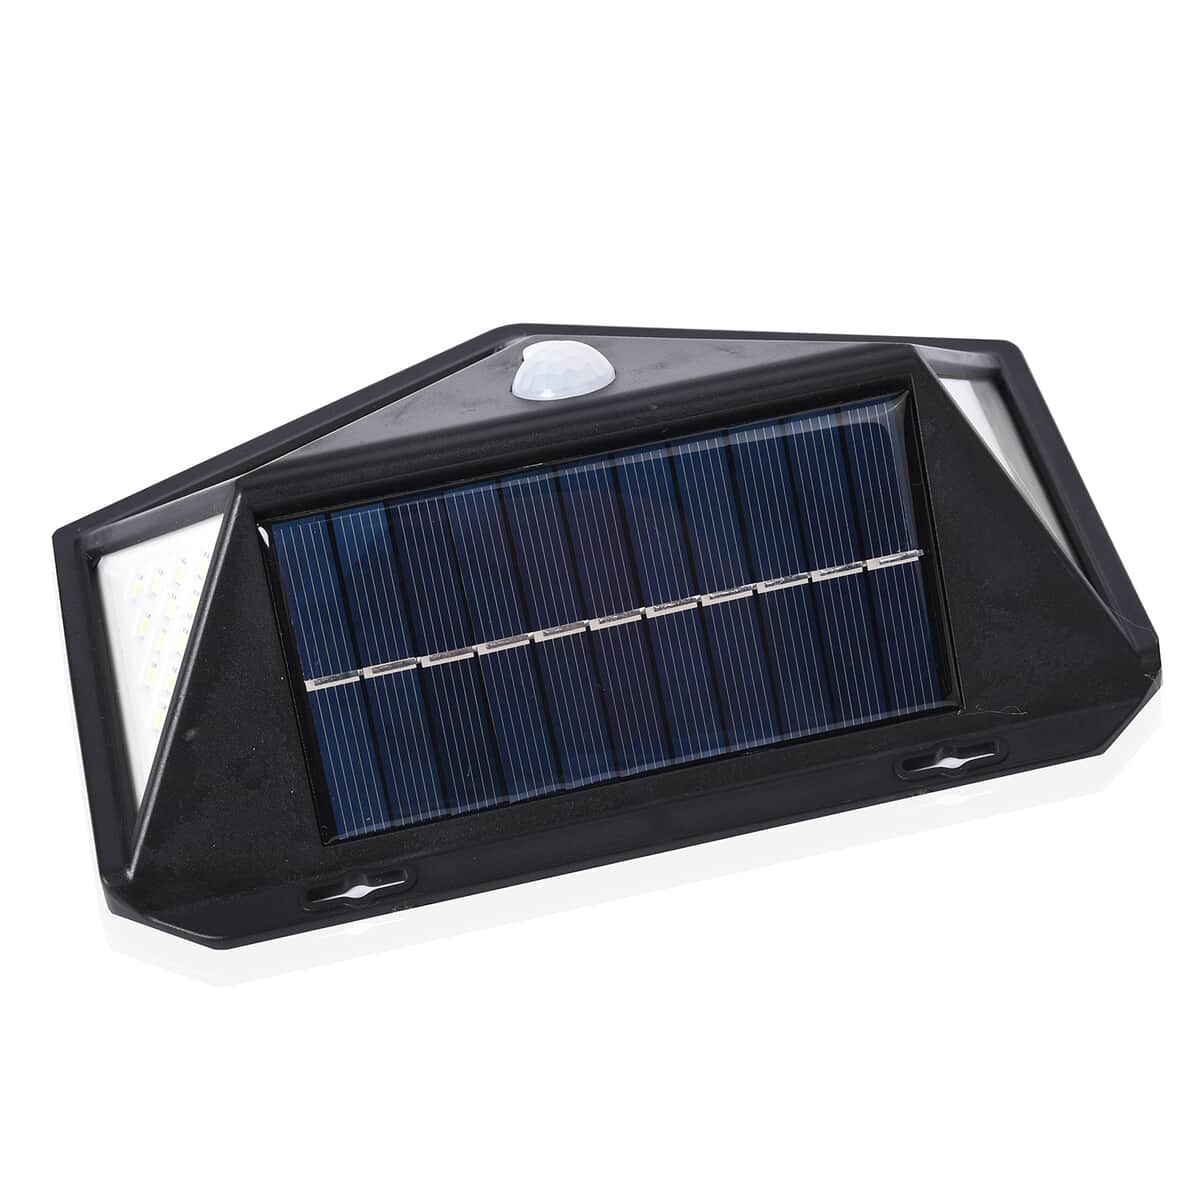 Waterproof Solar Rechargeable Motion Sensor Light with 114 LED Light, 3 Adjustment Modes and 270° Wide Angle image number 1